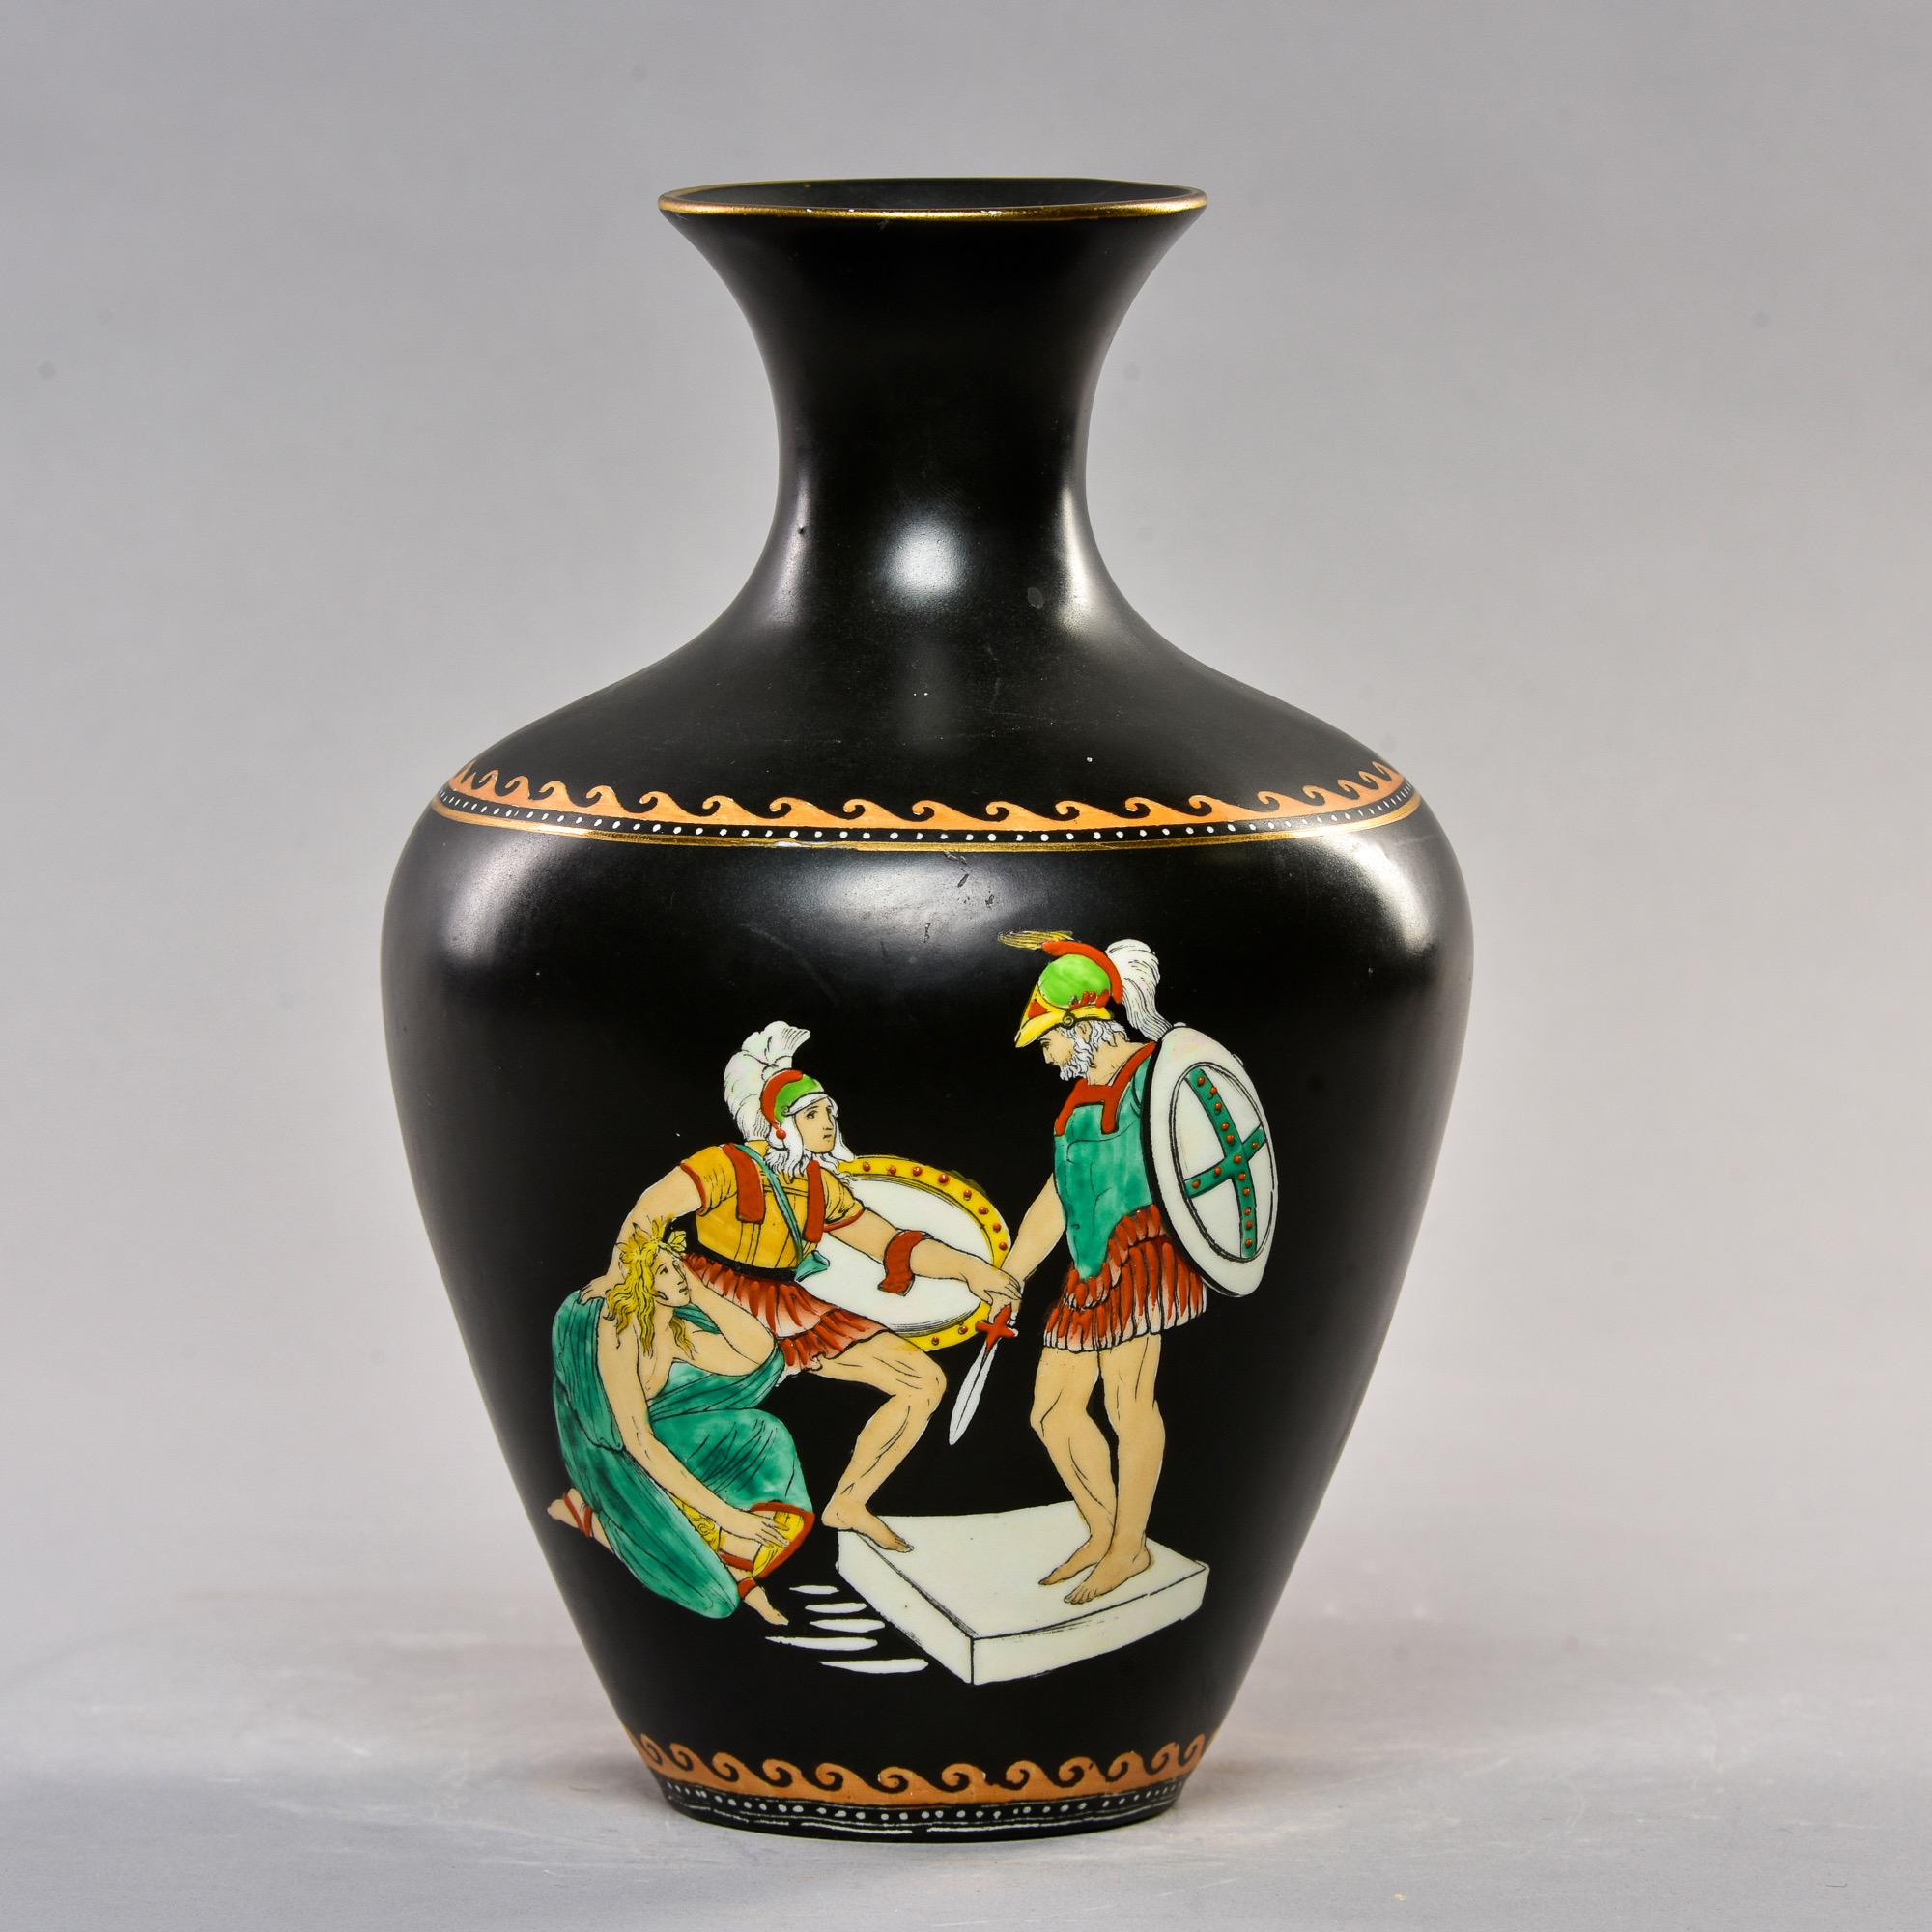 Rare circa 1920s English vase by John Tams Ltd depicting scene from Odyssey of Telemachus interceding for Phemius. Black matte glaze with colorful decoration of the three figures. Gold rim, and borders at shoulders and base.